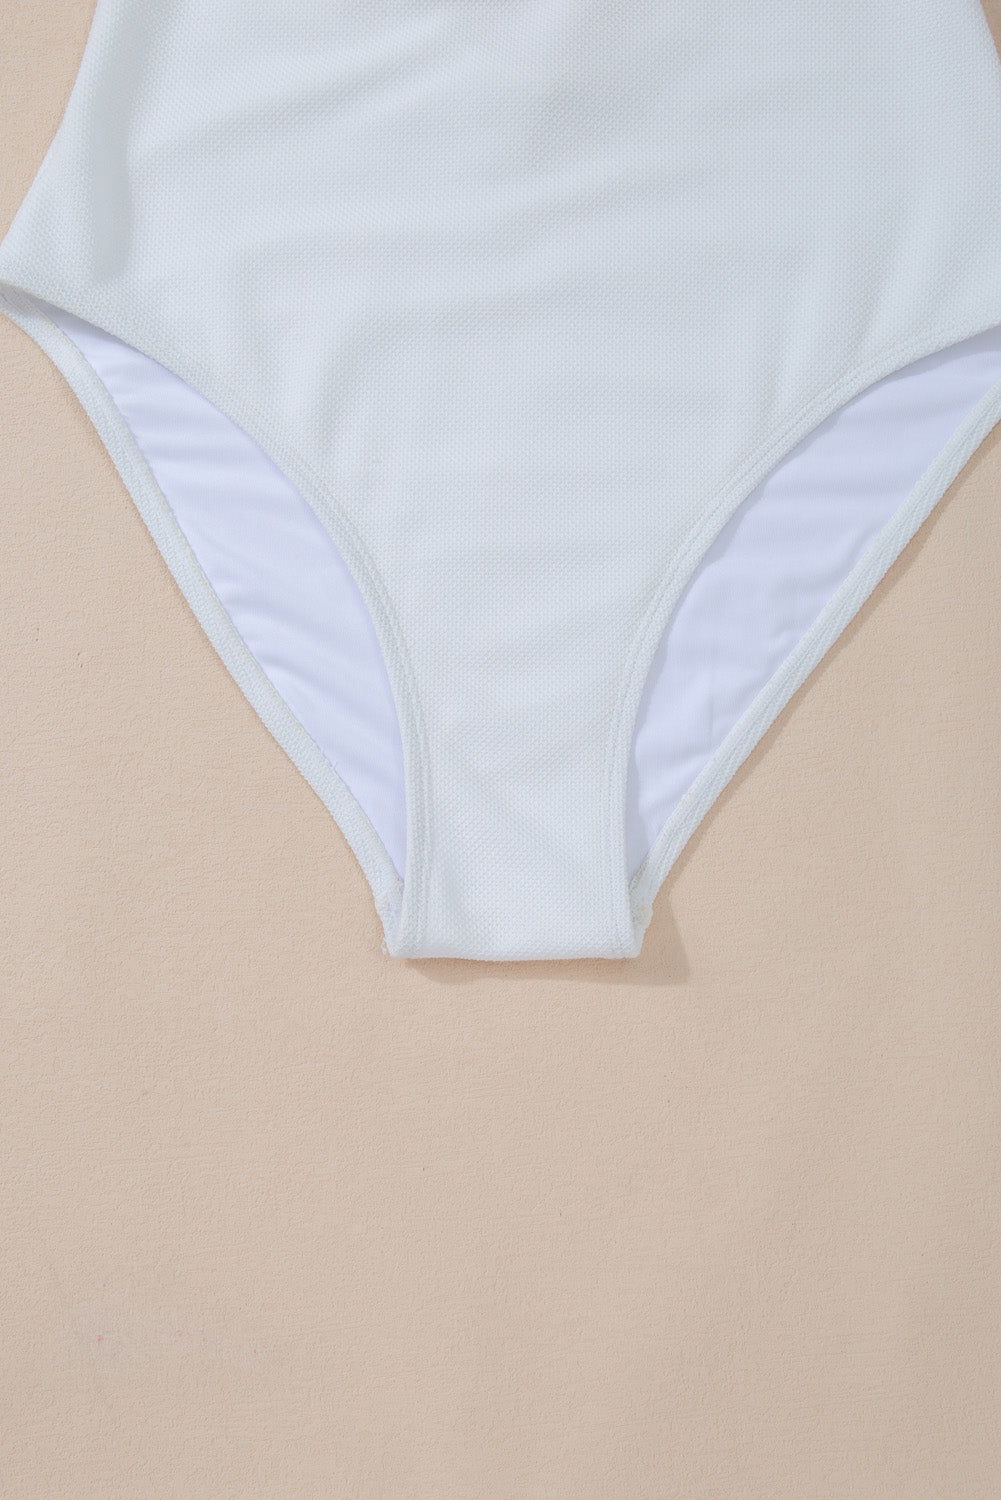 a women's white swimsuit with a high waist